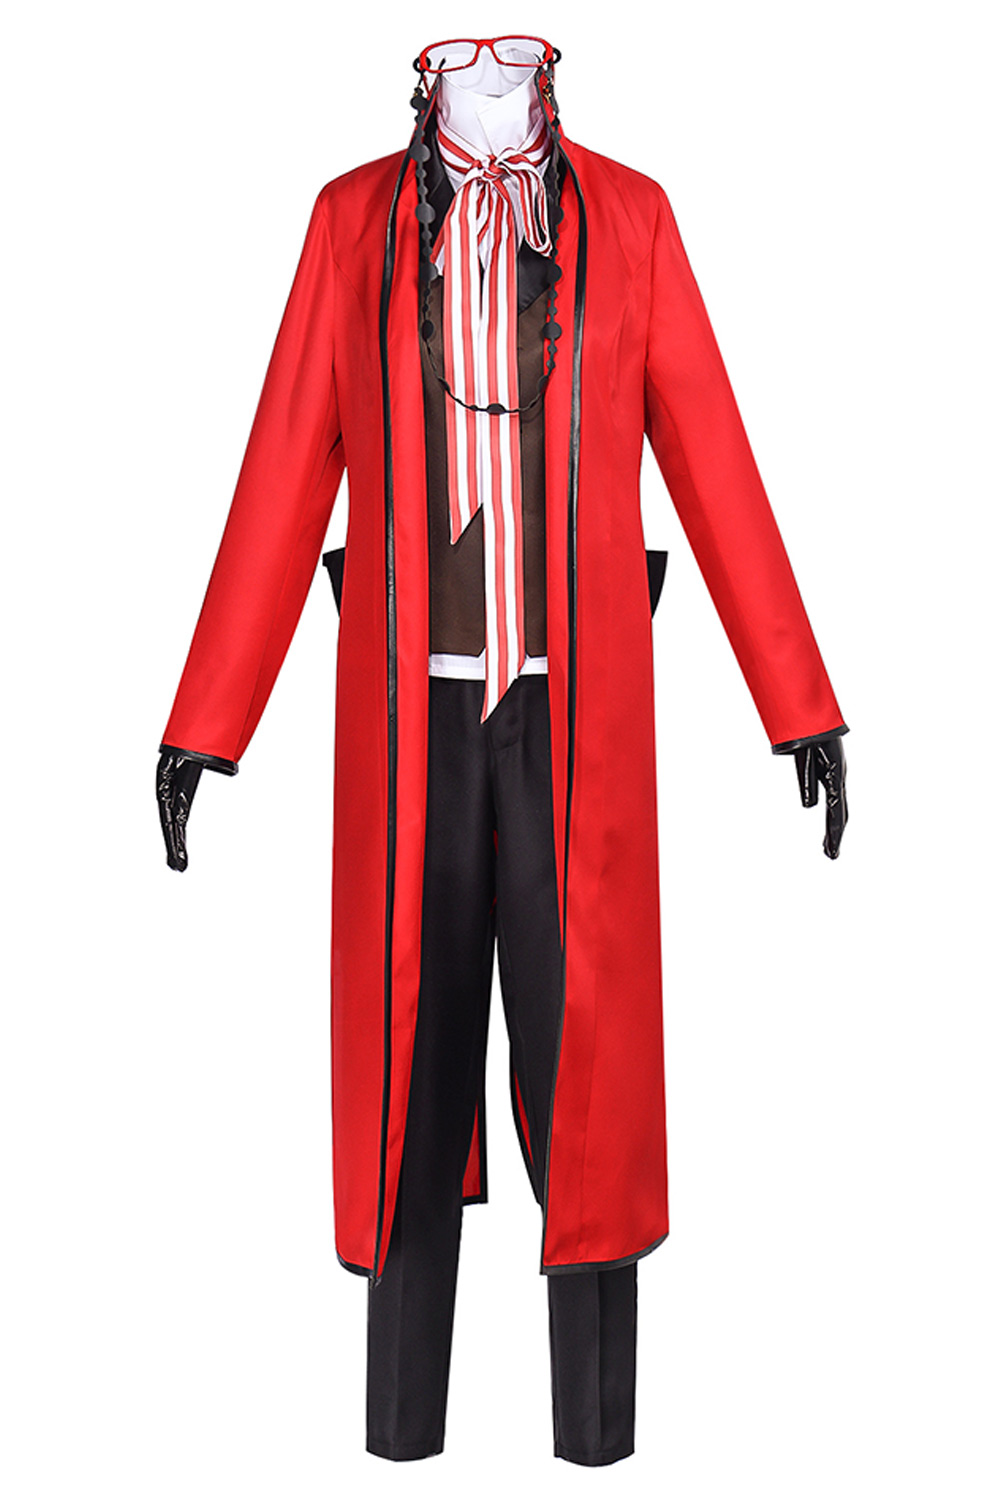 Anime Black Butler Ronald Knox Red Outfits Halloween Carnival Suit Cosplay Costume